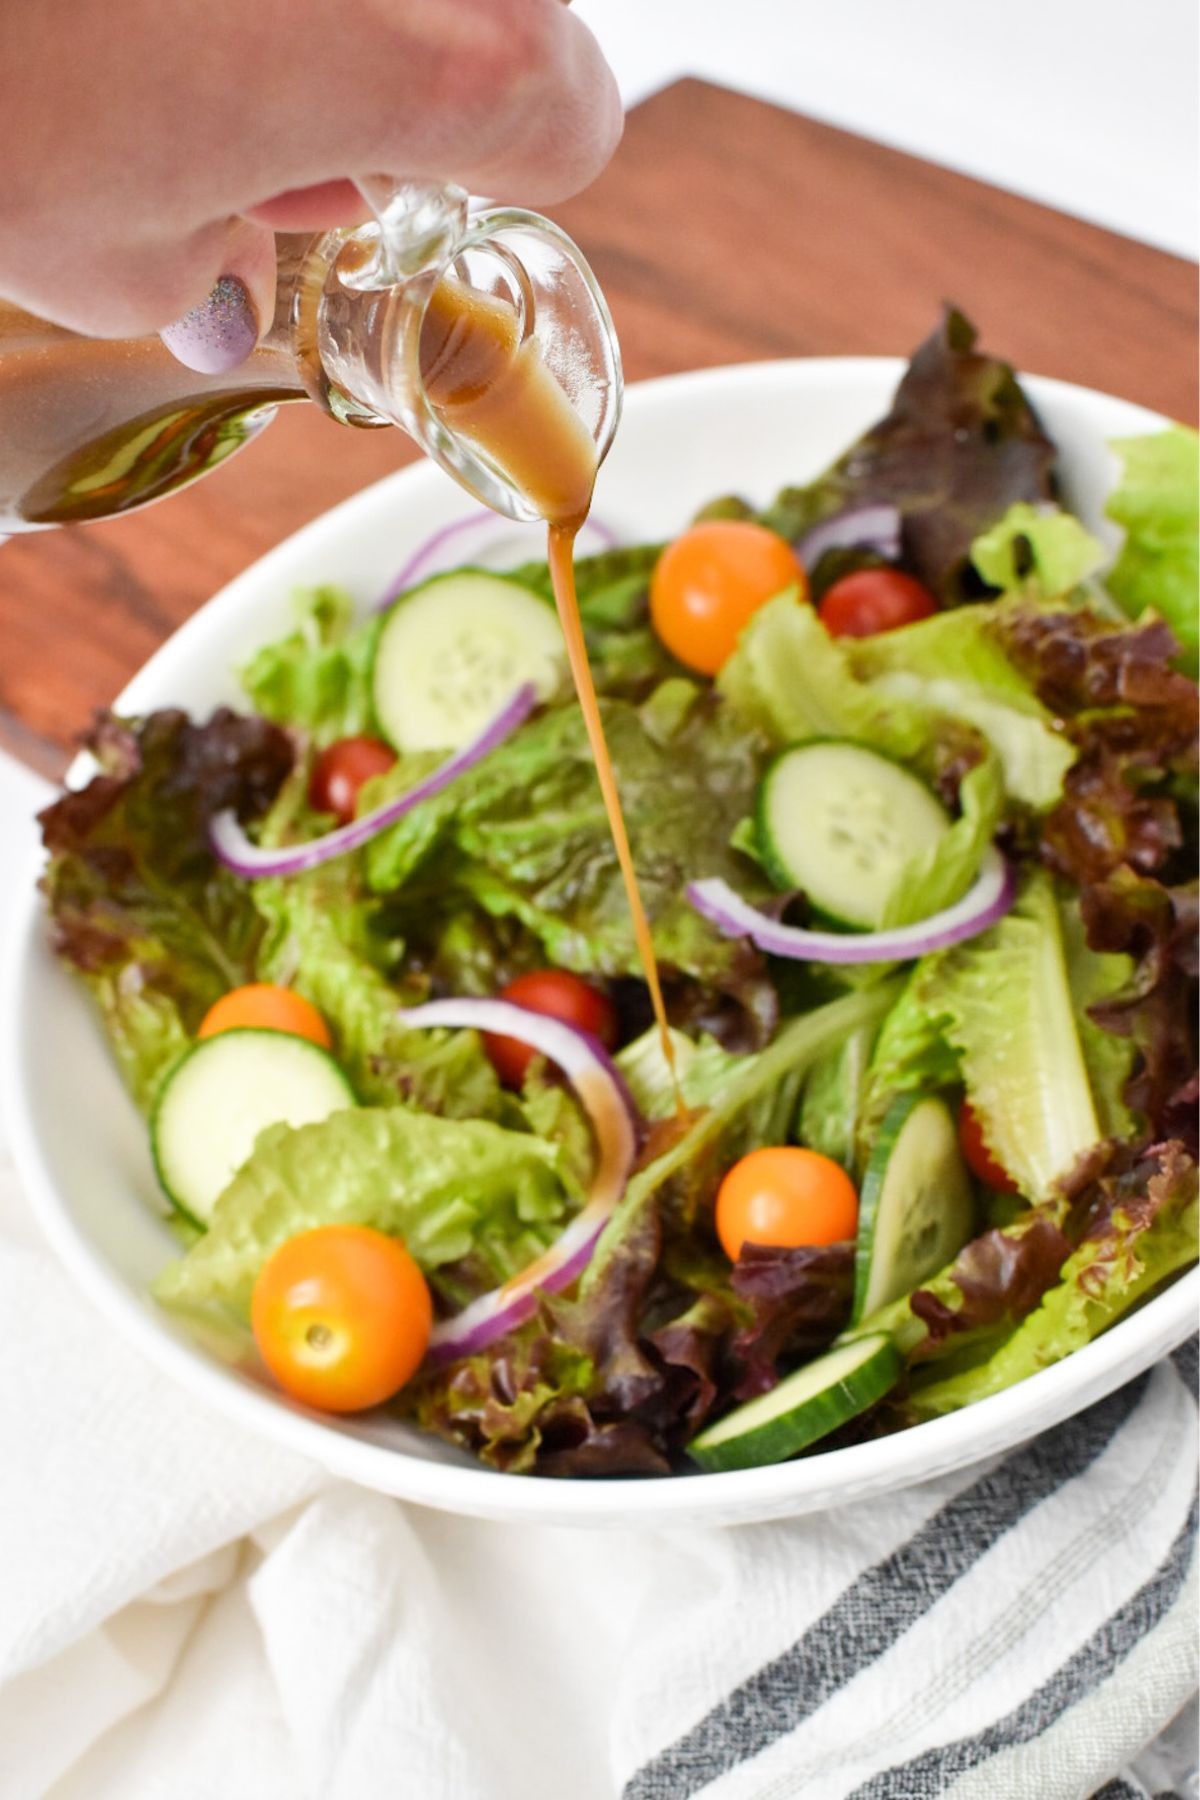 Balsamic vinegar and olive oil dressing being poured on top of a salad.